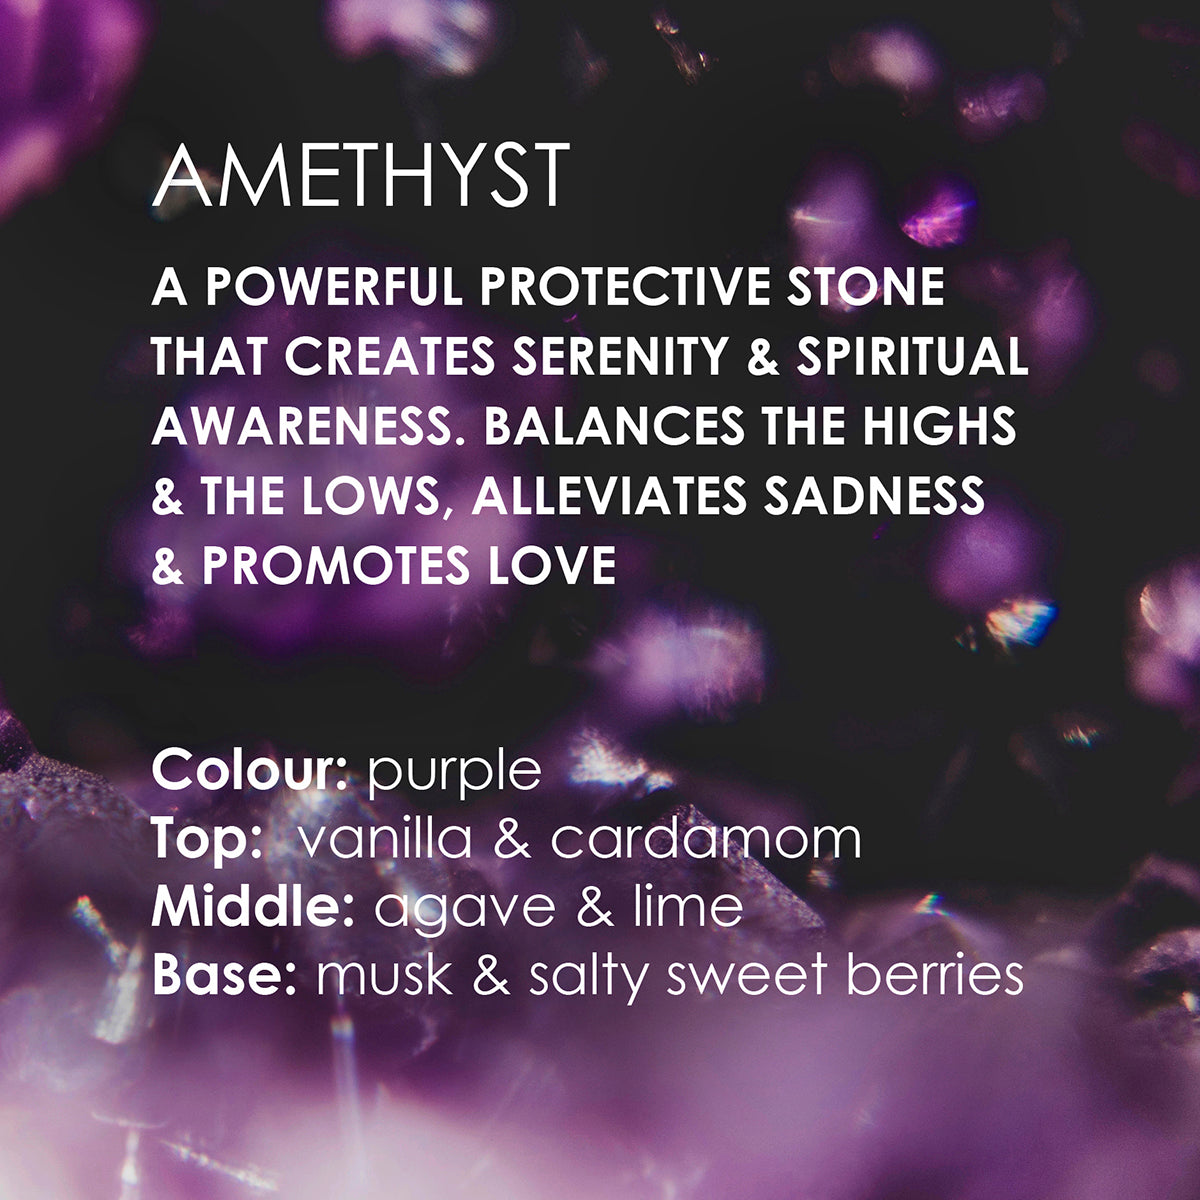 Promotional image for Amethyst scented candle with essential oil fragrance notes and benefits of the Amethyst crystal.